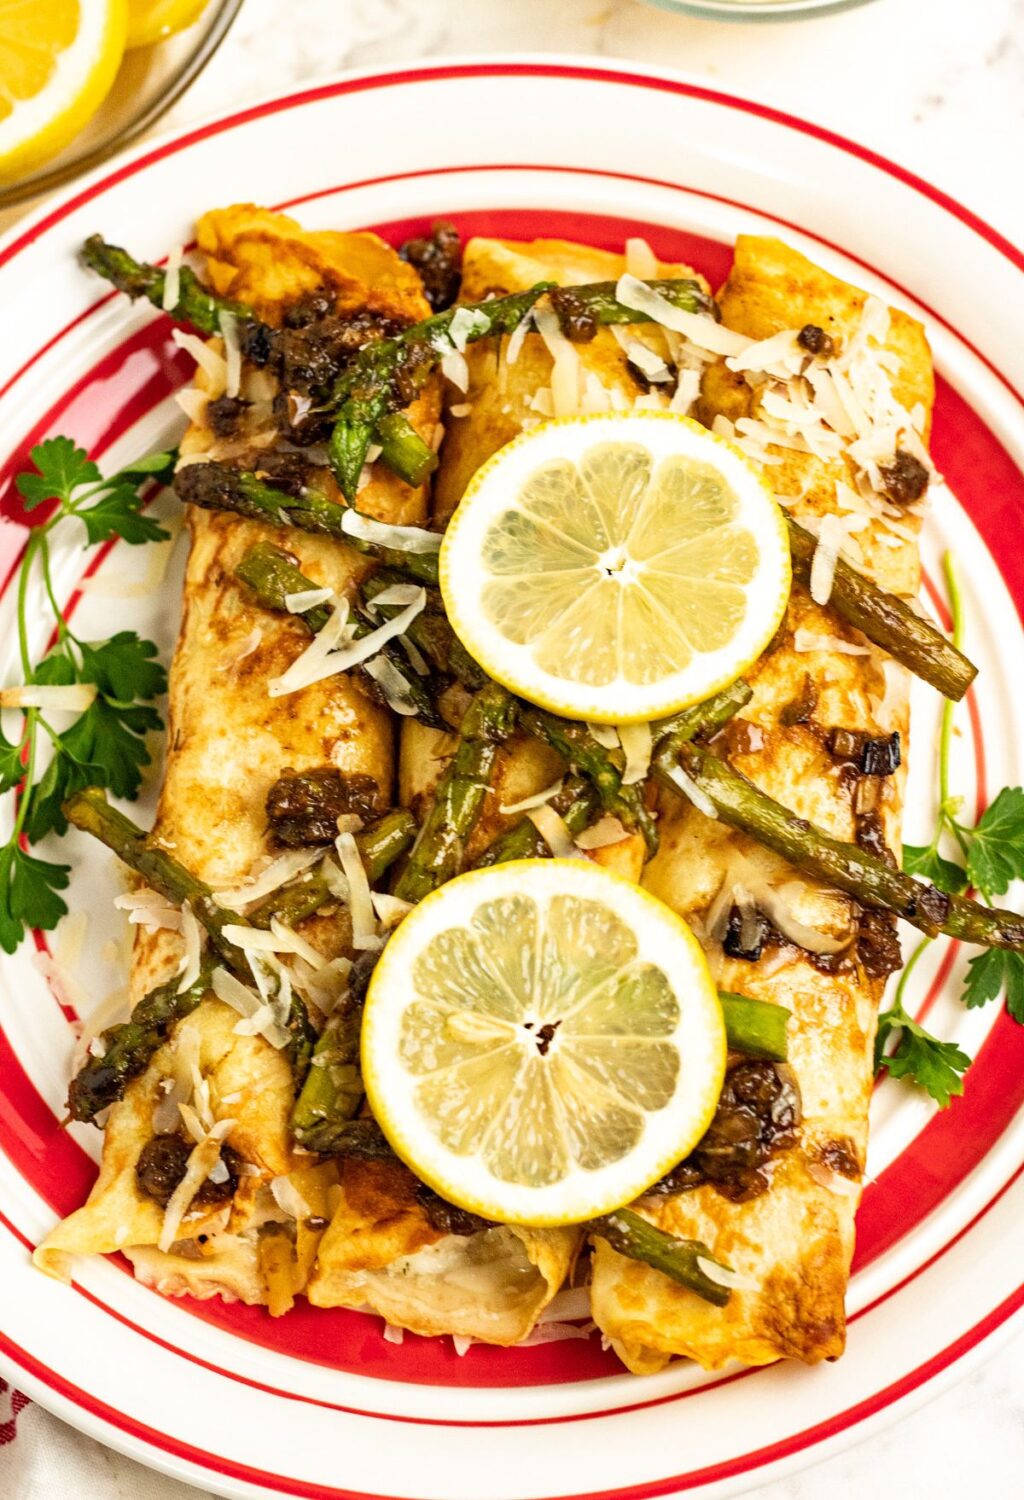 Enchiladas with asparagus and lemon on a red and white plate.